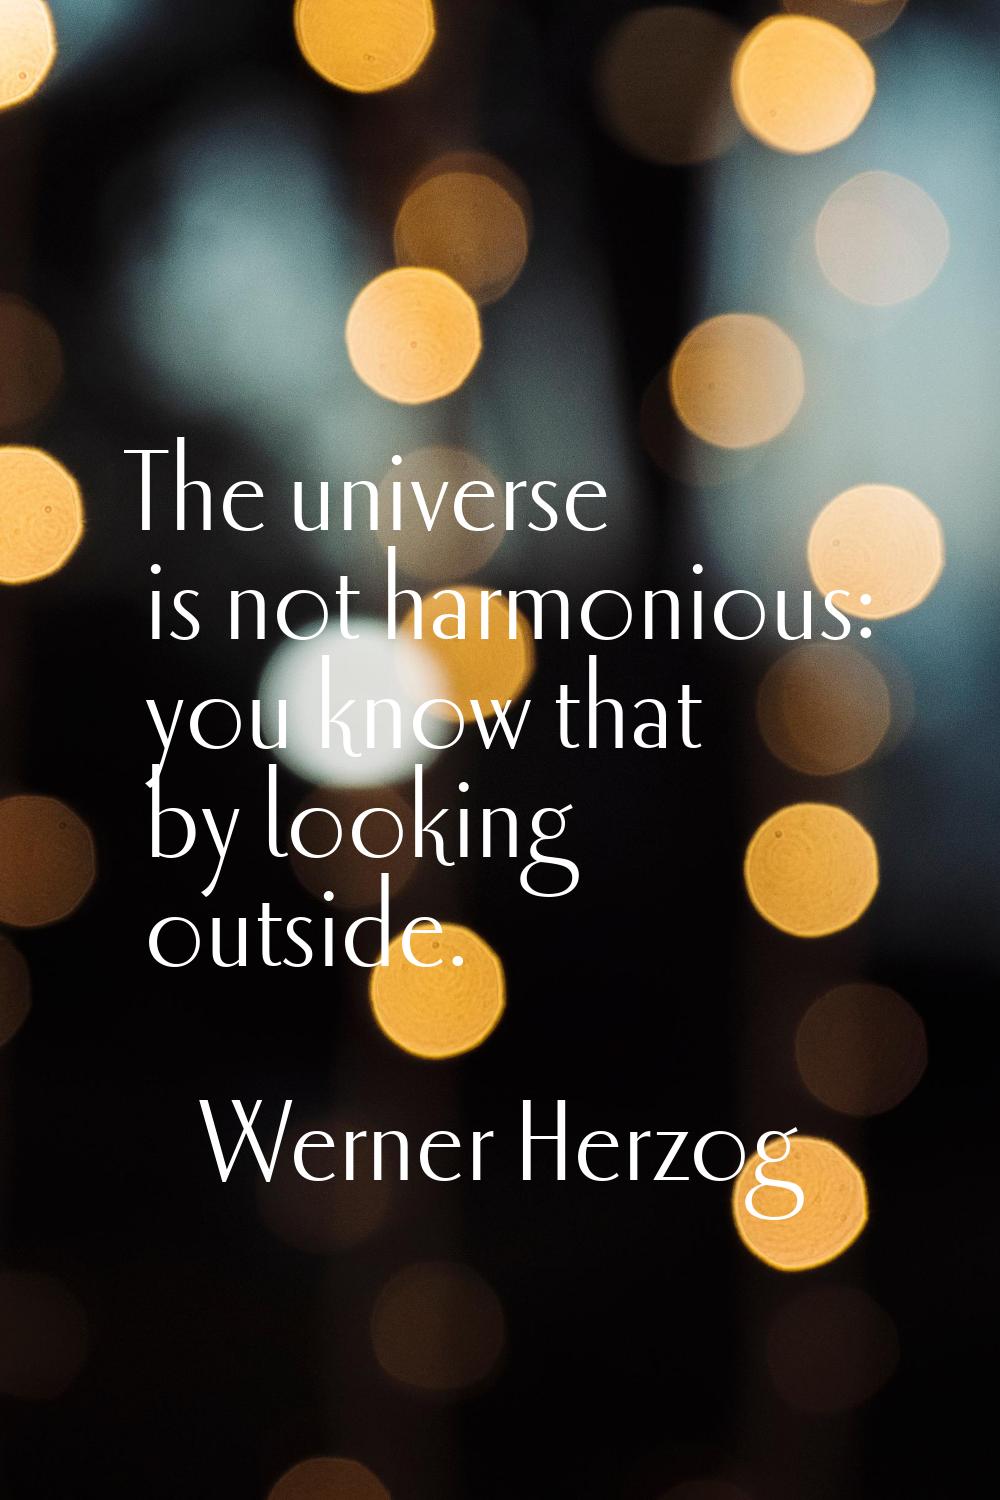 The universe is not harmonious: you know that by looking outside.